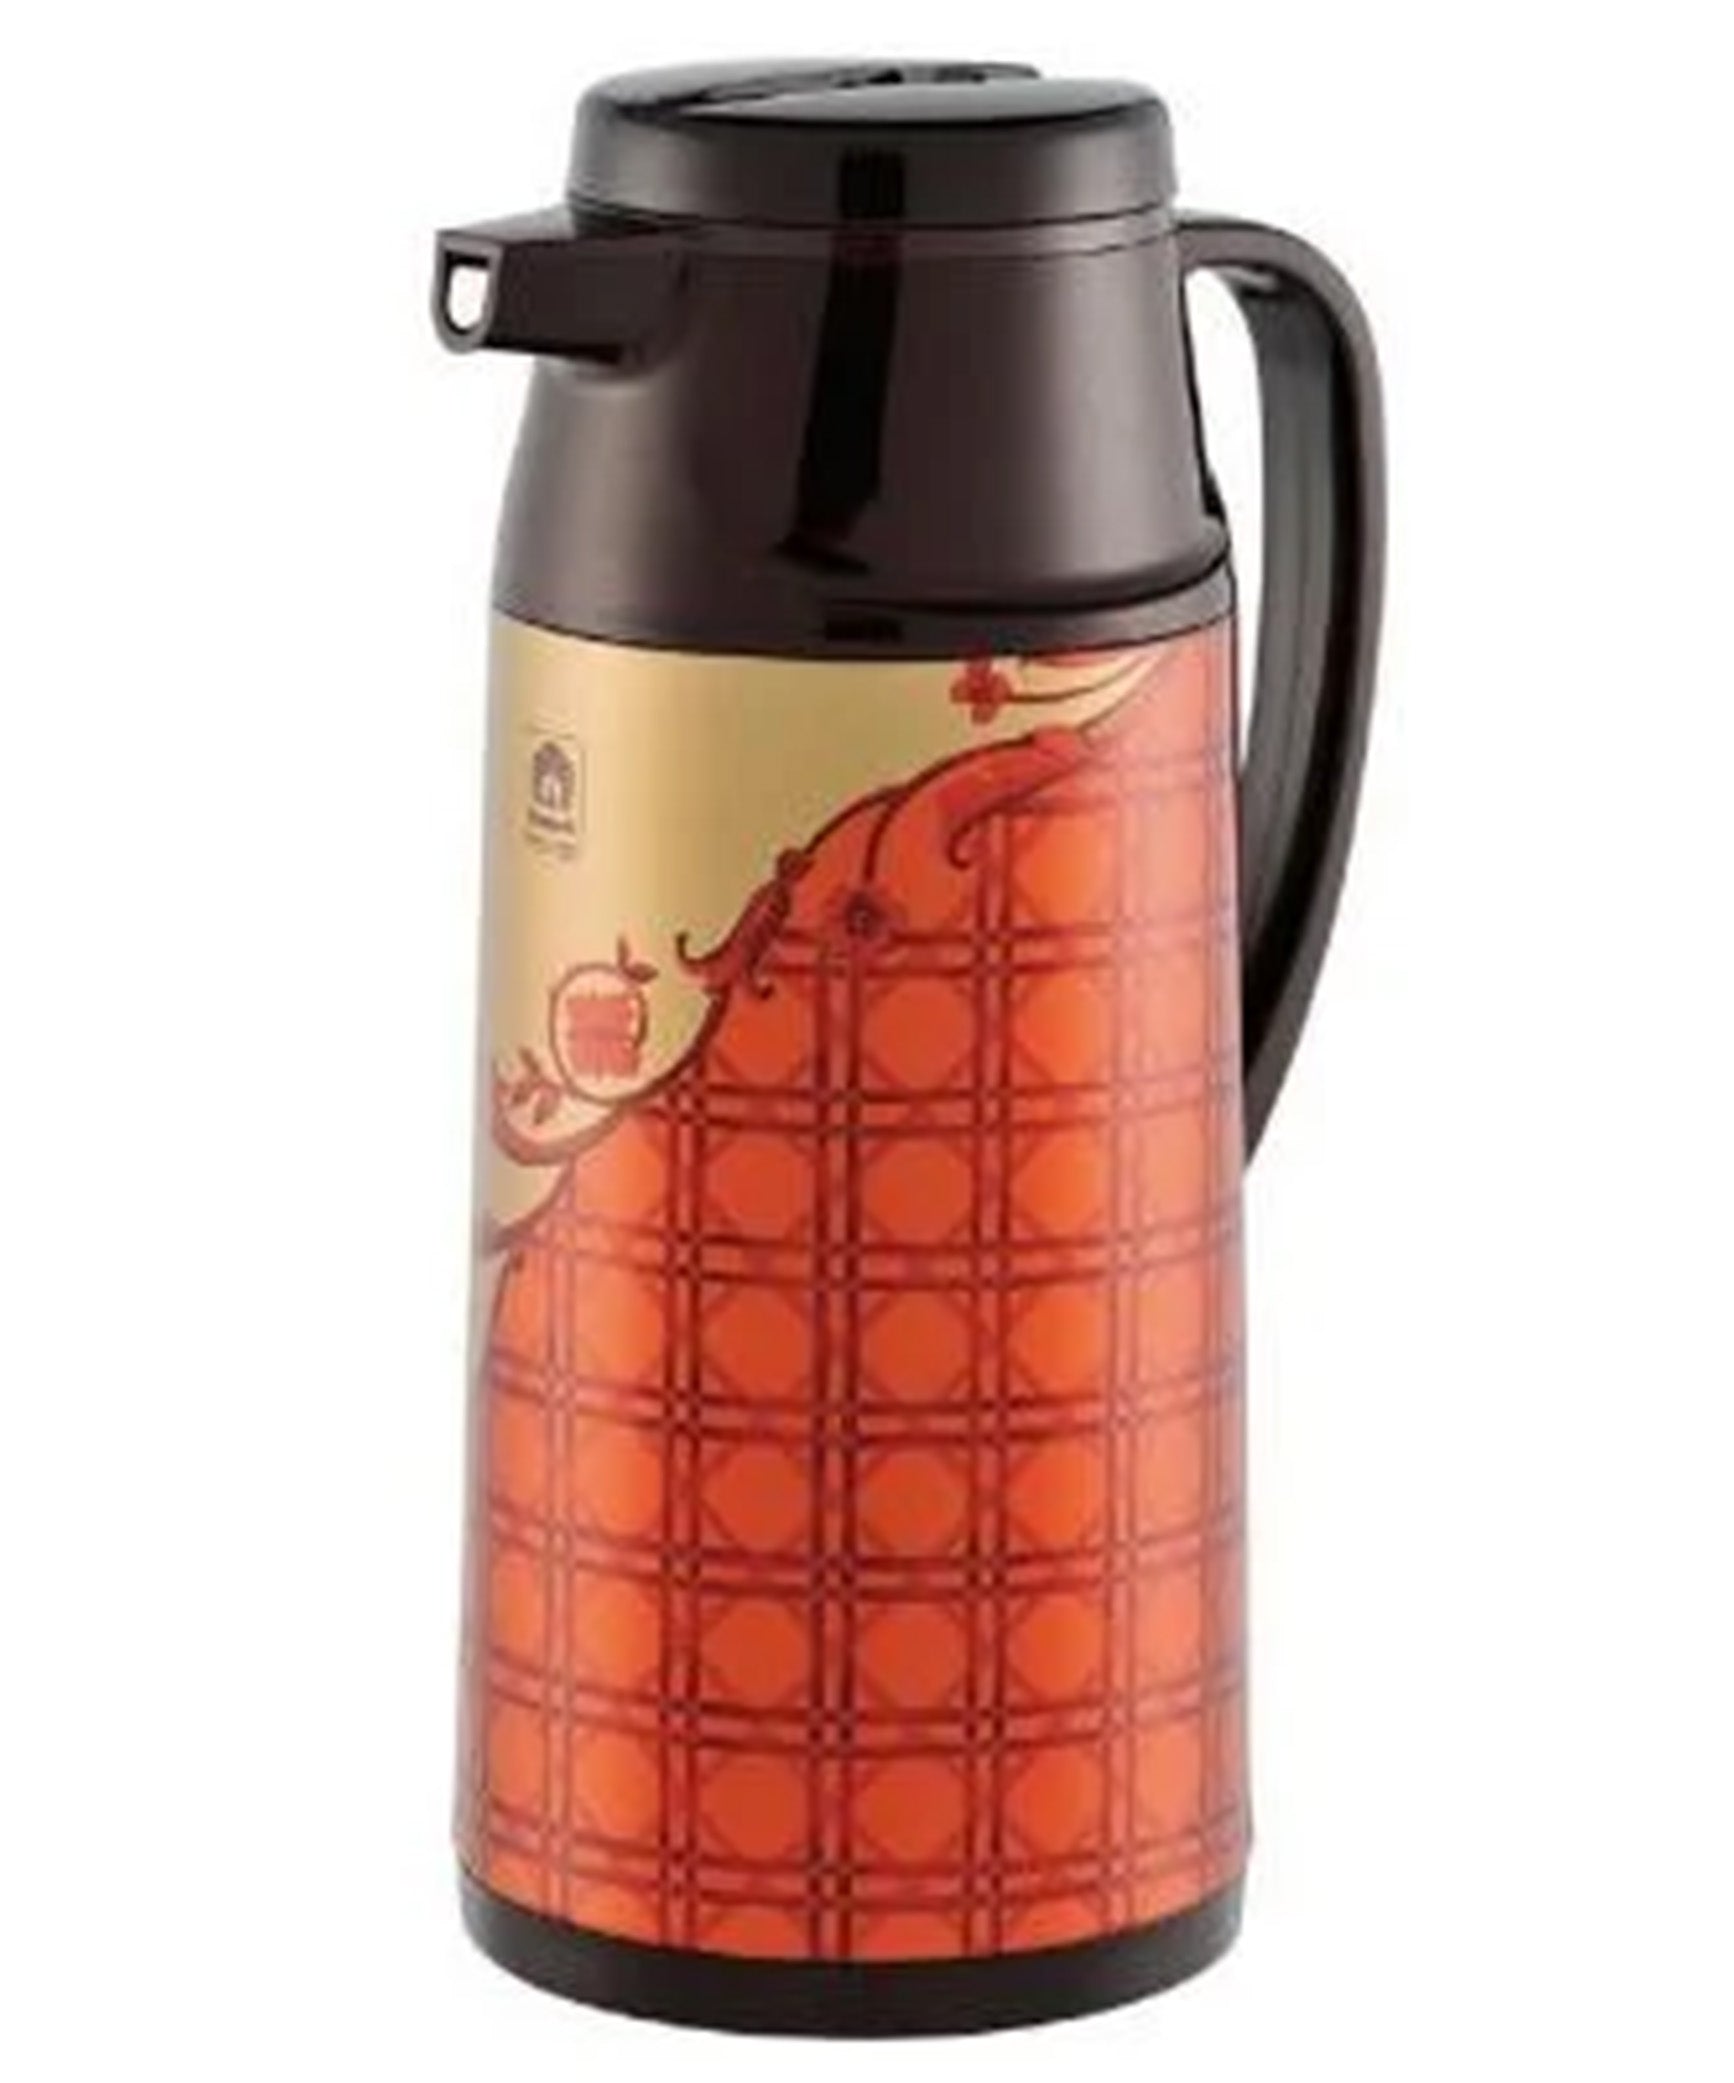 Peacock Stainless Steel Vacuum Flask 1.9 Litres, AIT190